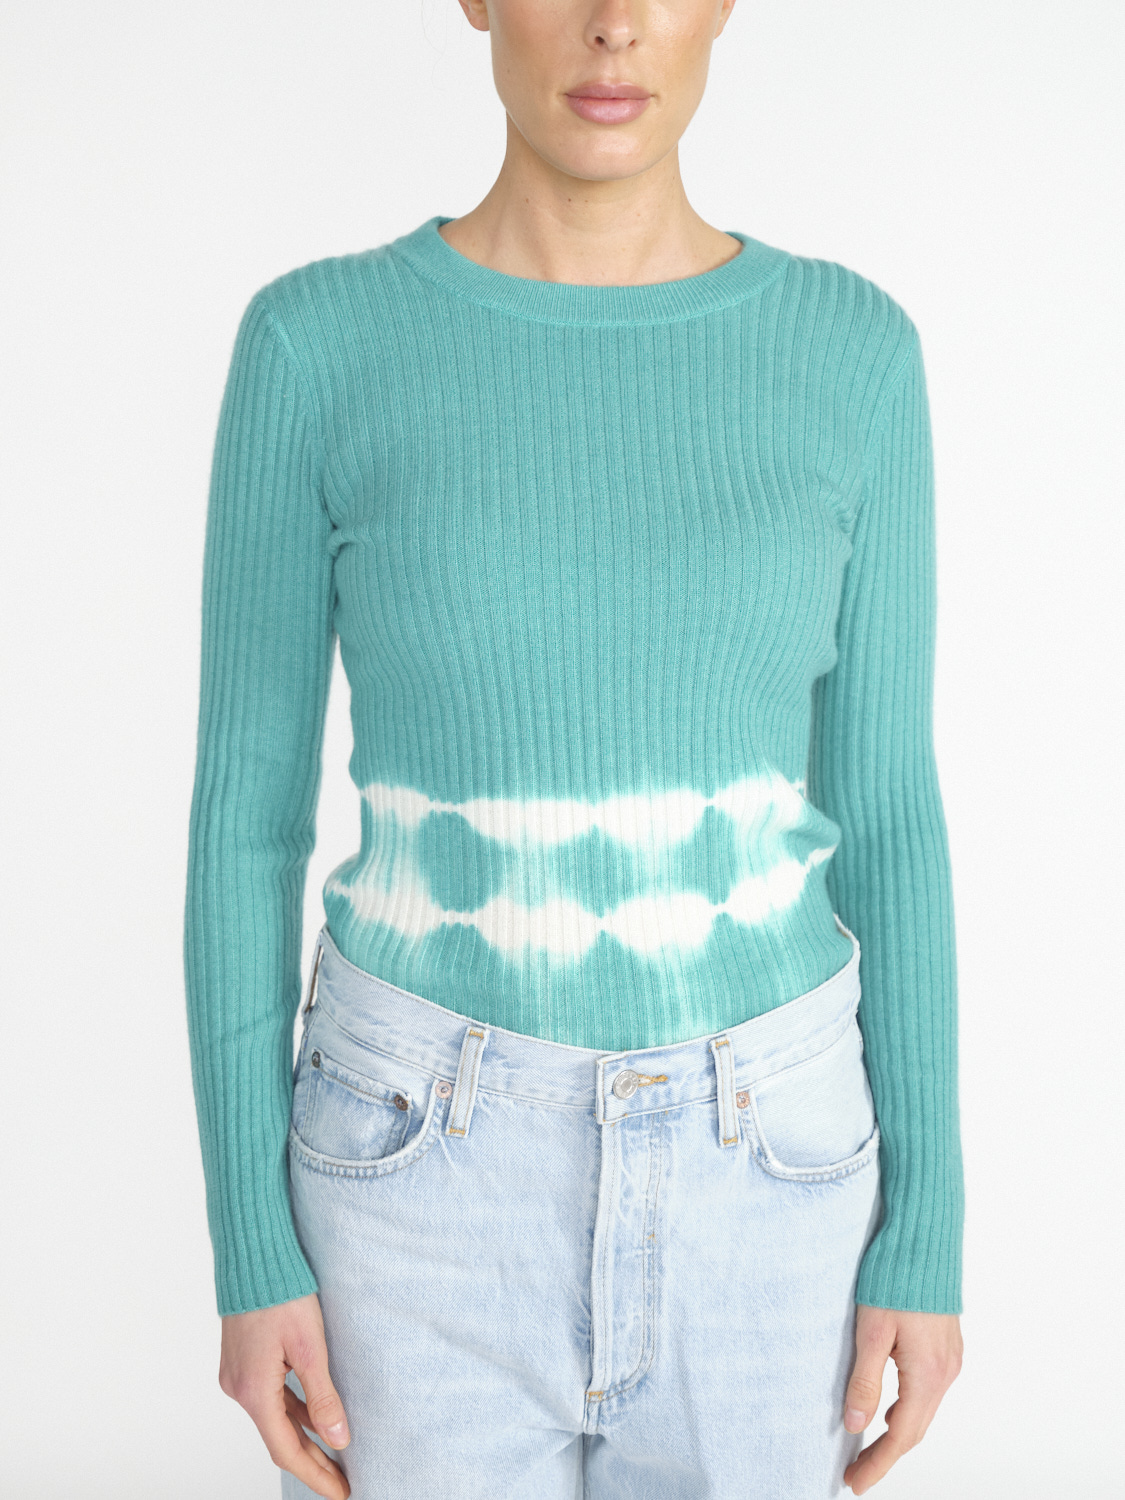 Kujten Bibi ribbed cashmere sweater with tie-dye details  mint S/M